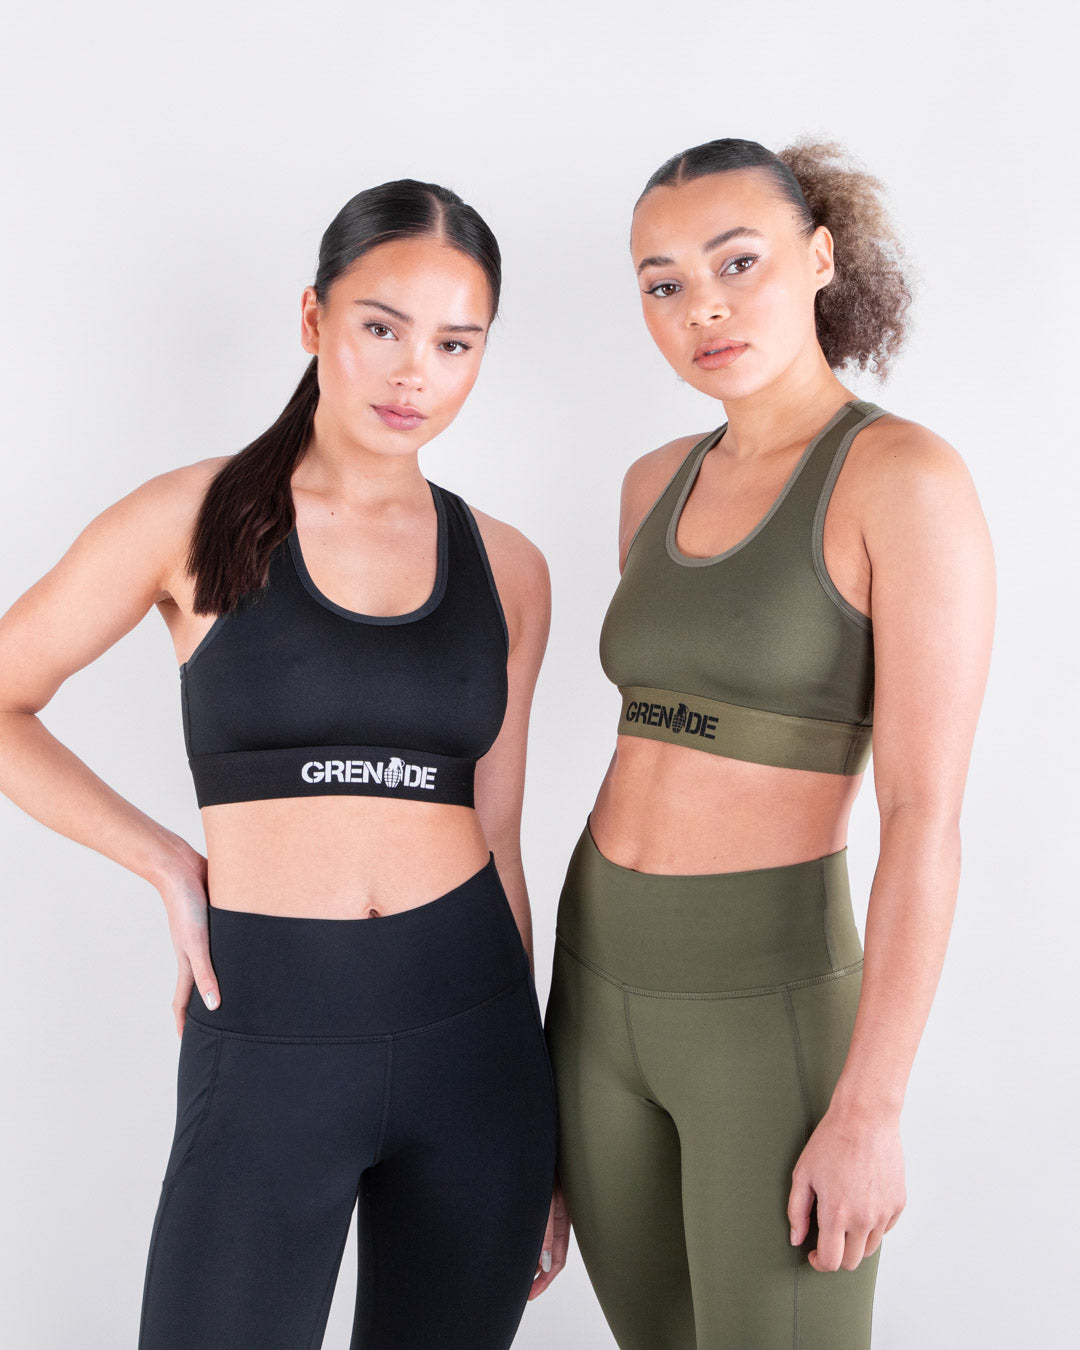 Grenade Womens Sports Bra - Recruit Army Green And Black